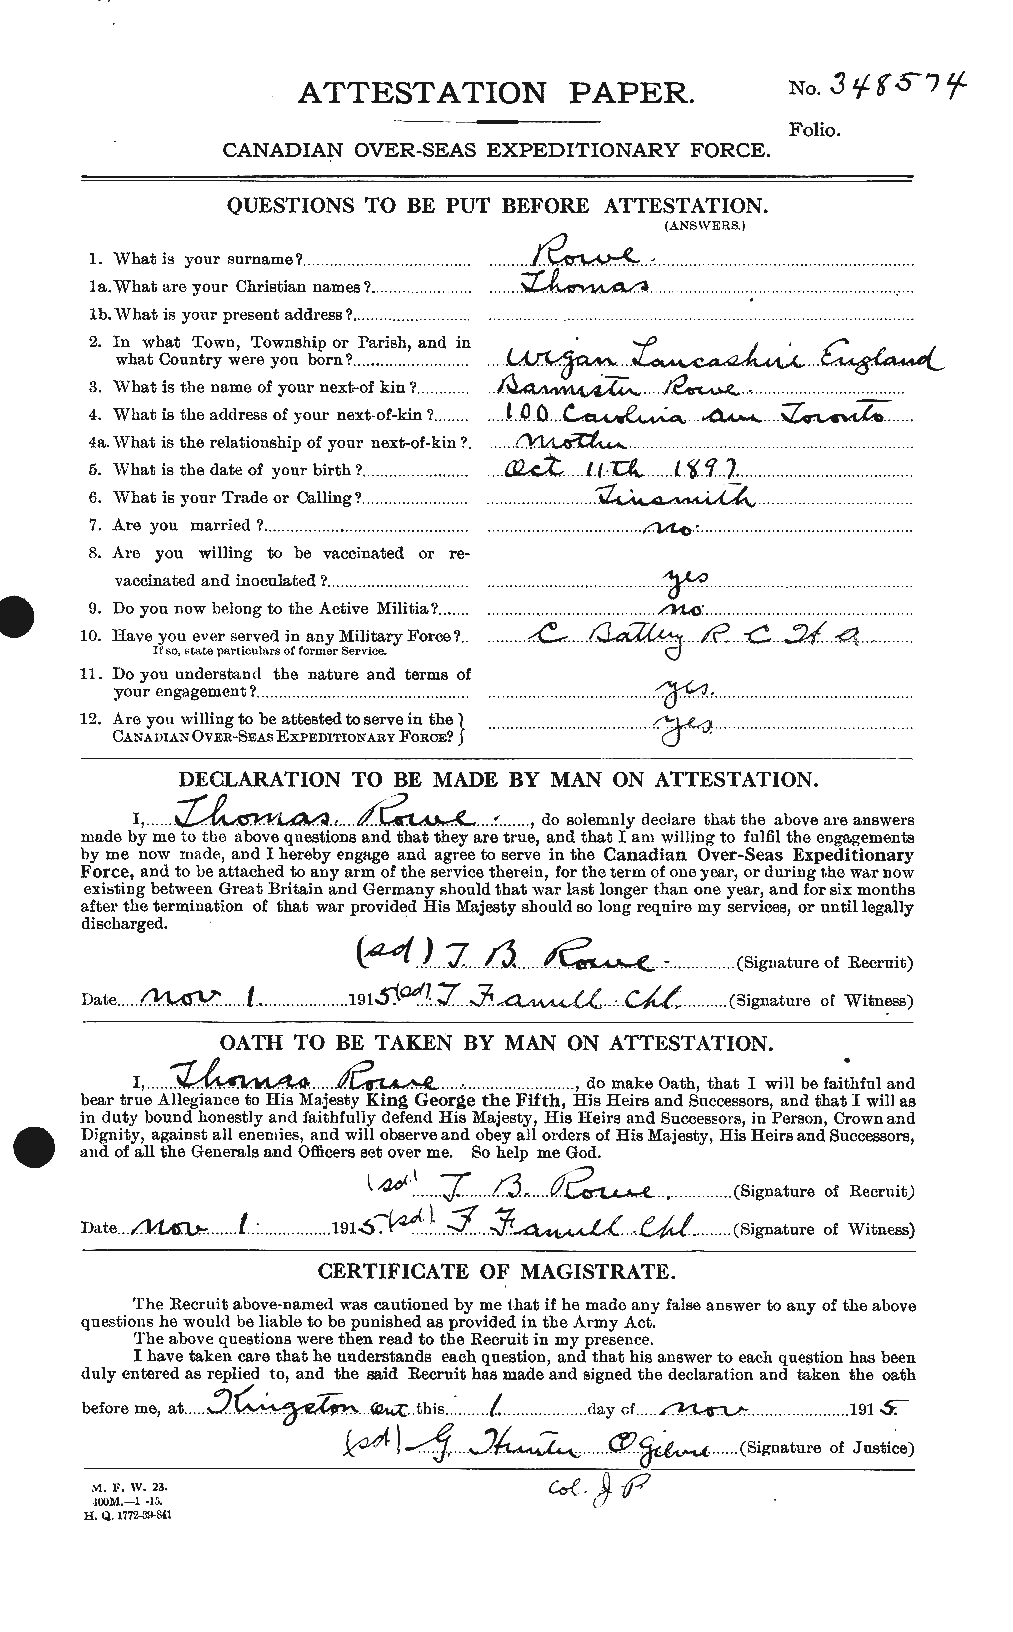 Personnel Records of the First World War - CEF 615999a